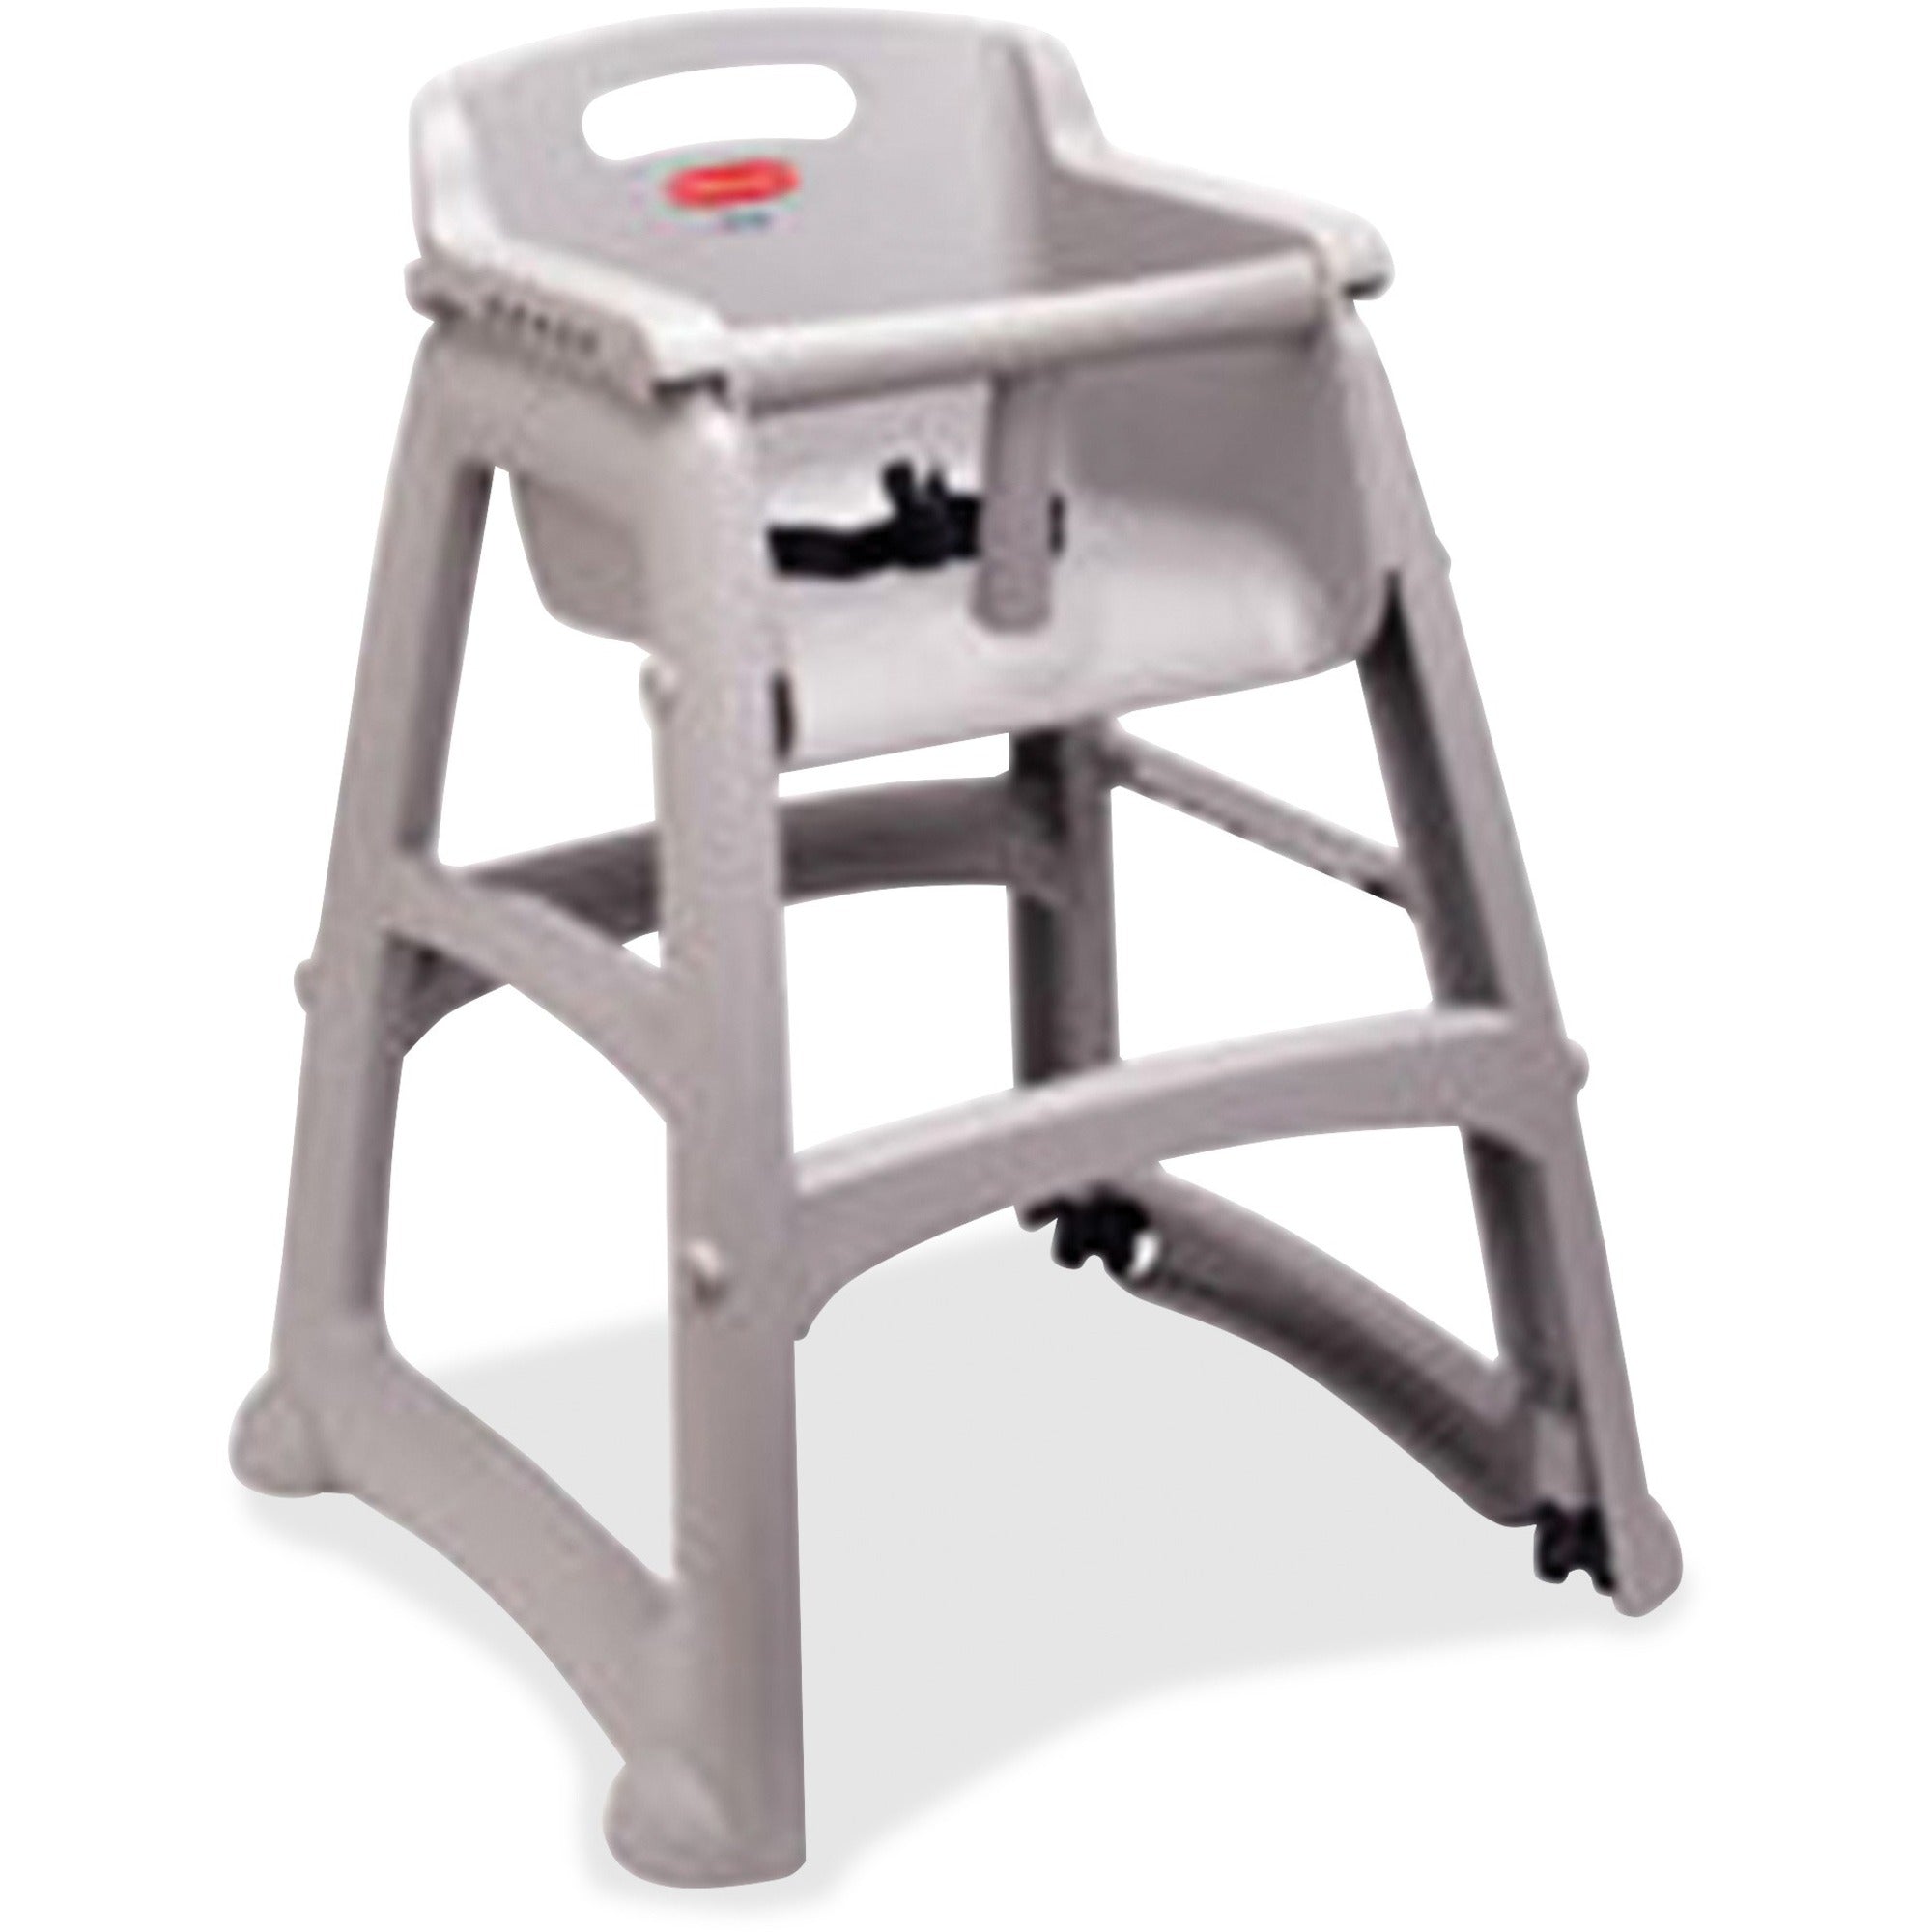 rubbermaid-commercial-sturdy-chair-youth-high-chair-platinum-1-carton_rcp780608plat - 1